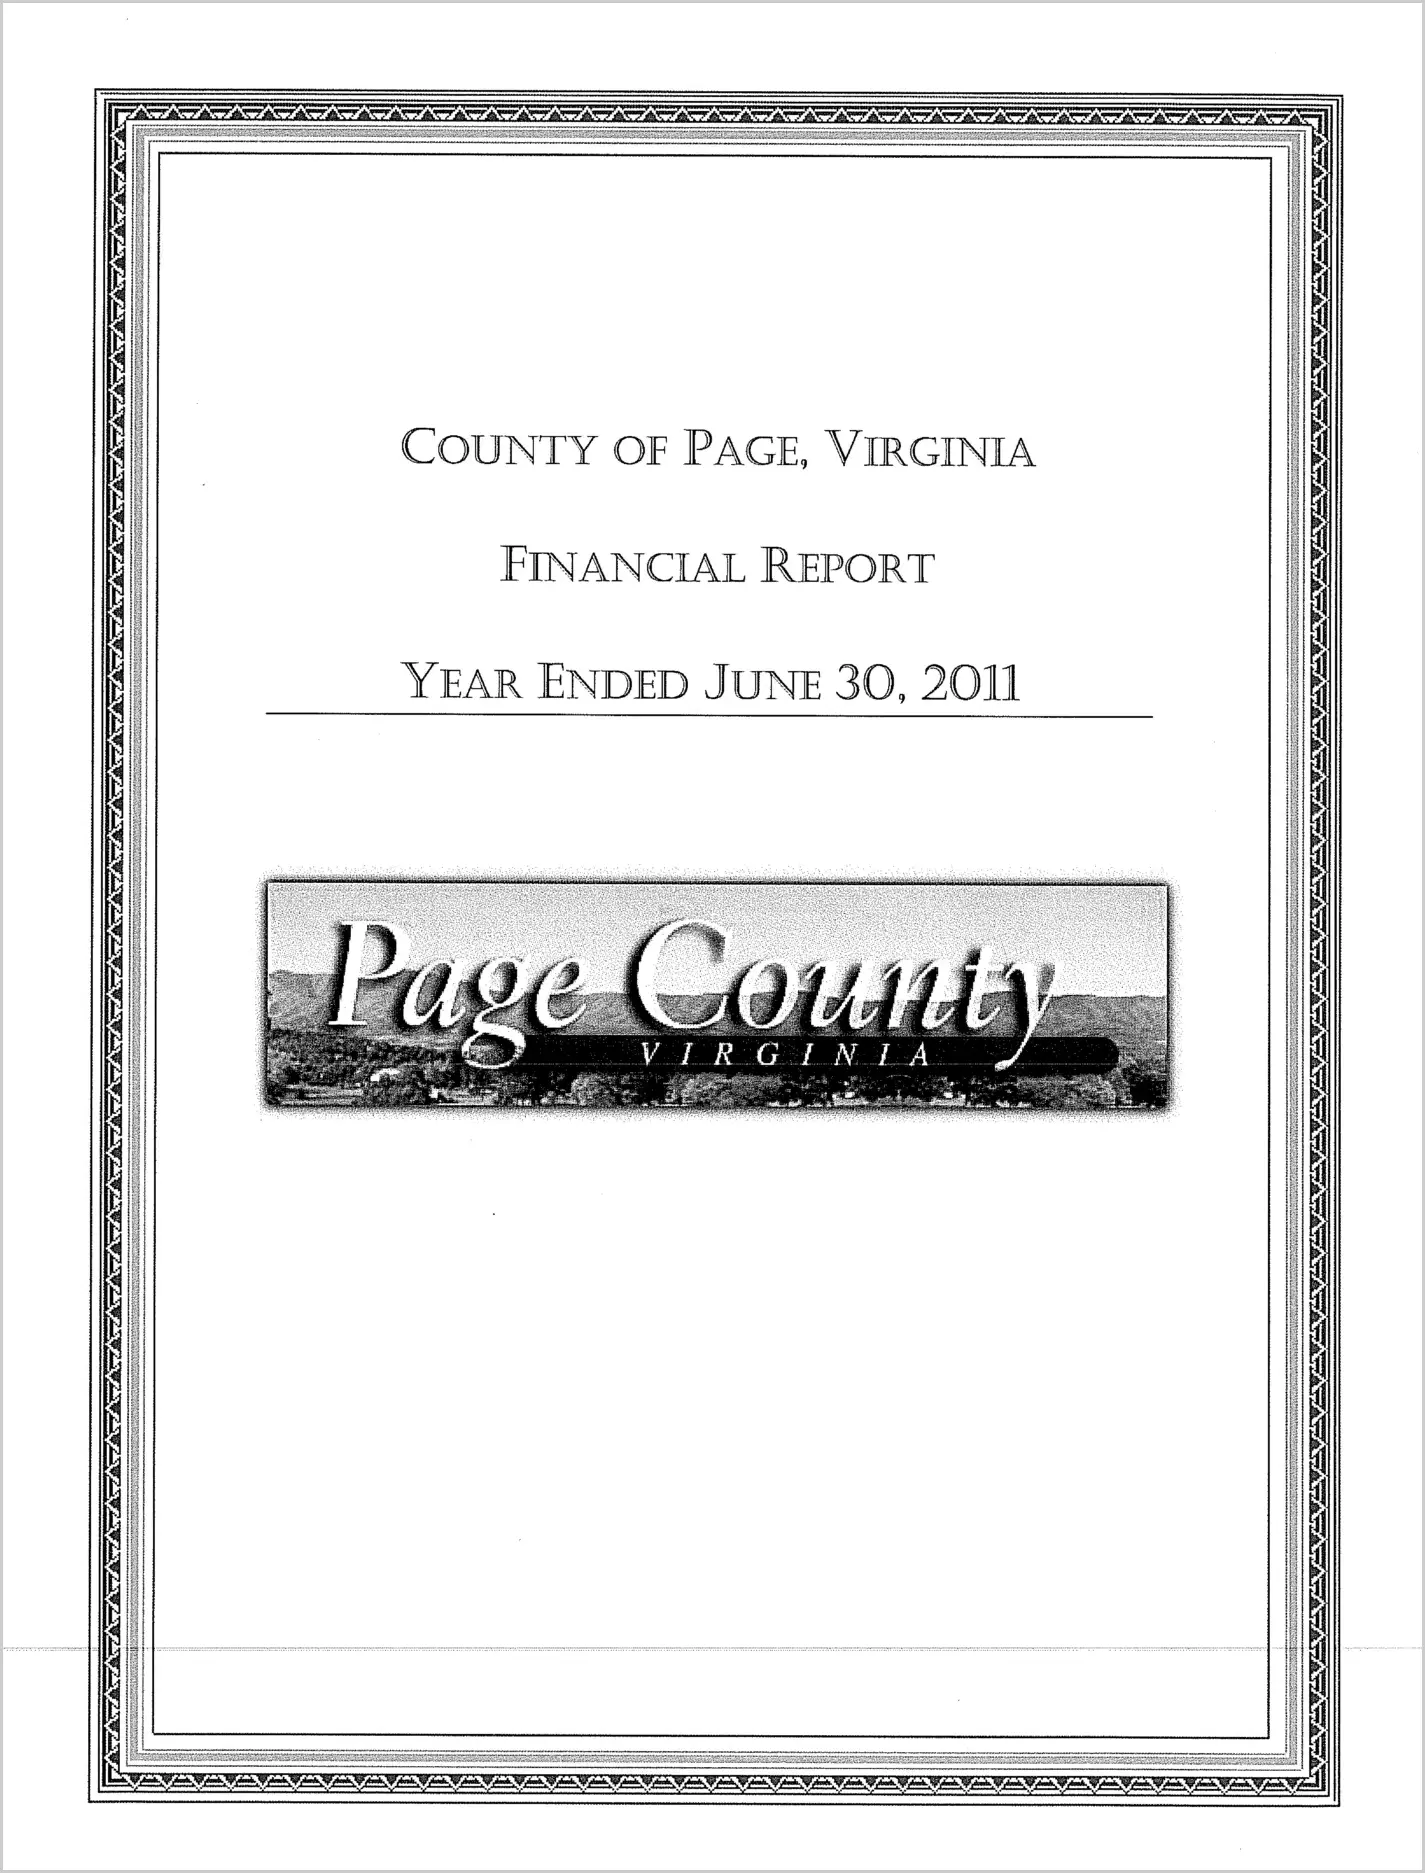 2010 Annual Financial Report for County of Page